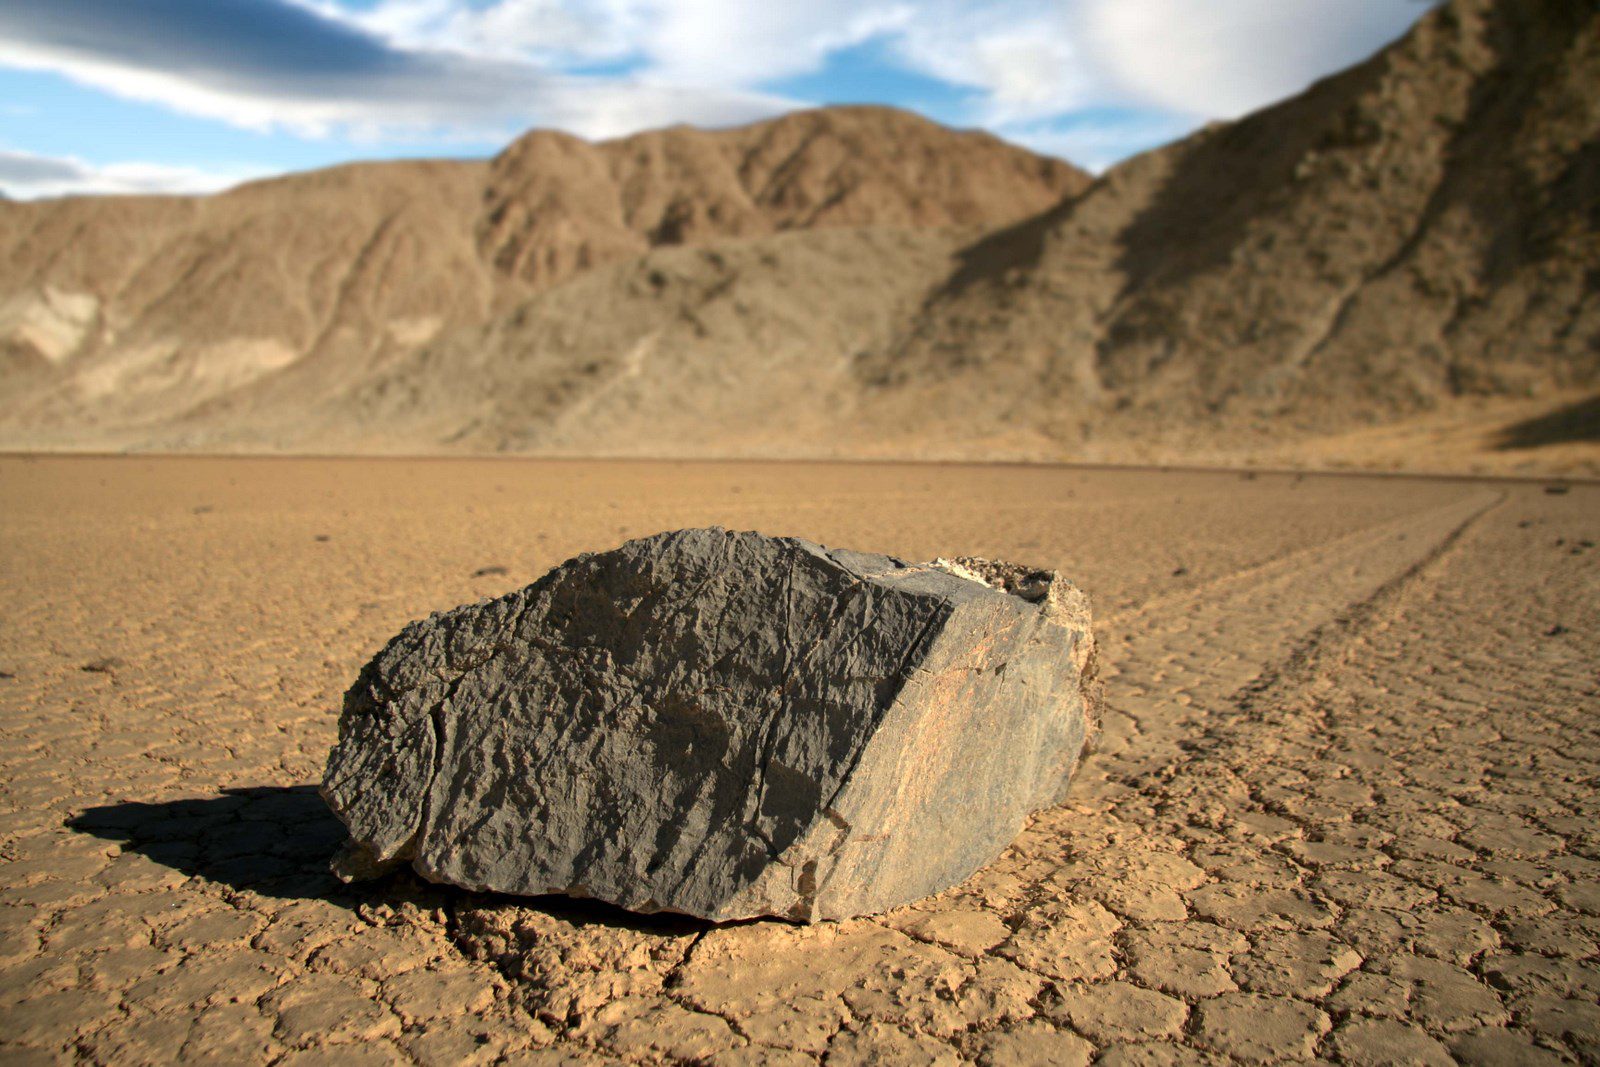 Another sailing stone in Racetrack Playa